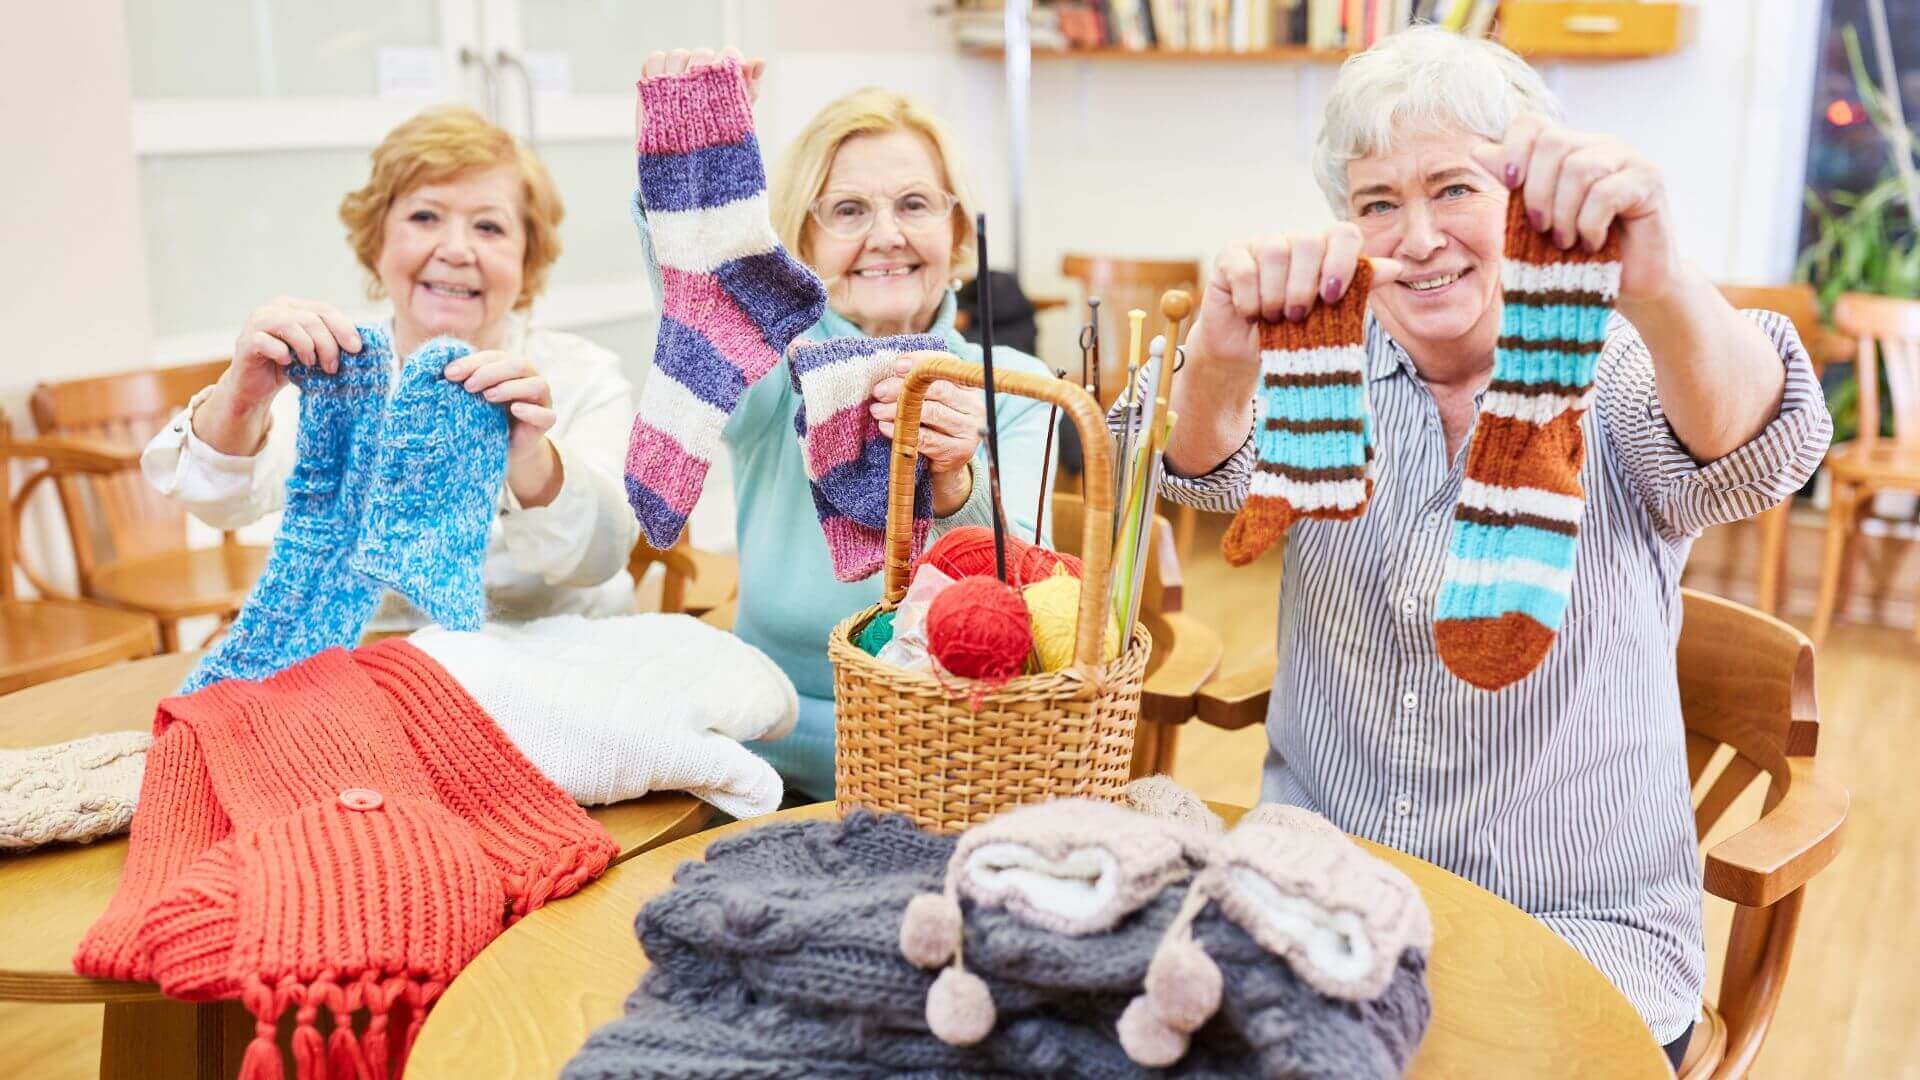 Collombatti naturals handmade and sustainable christmas gifts picture of ladies showing off their knitted garments and socks